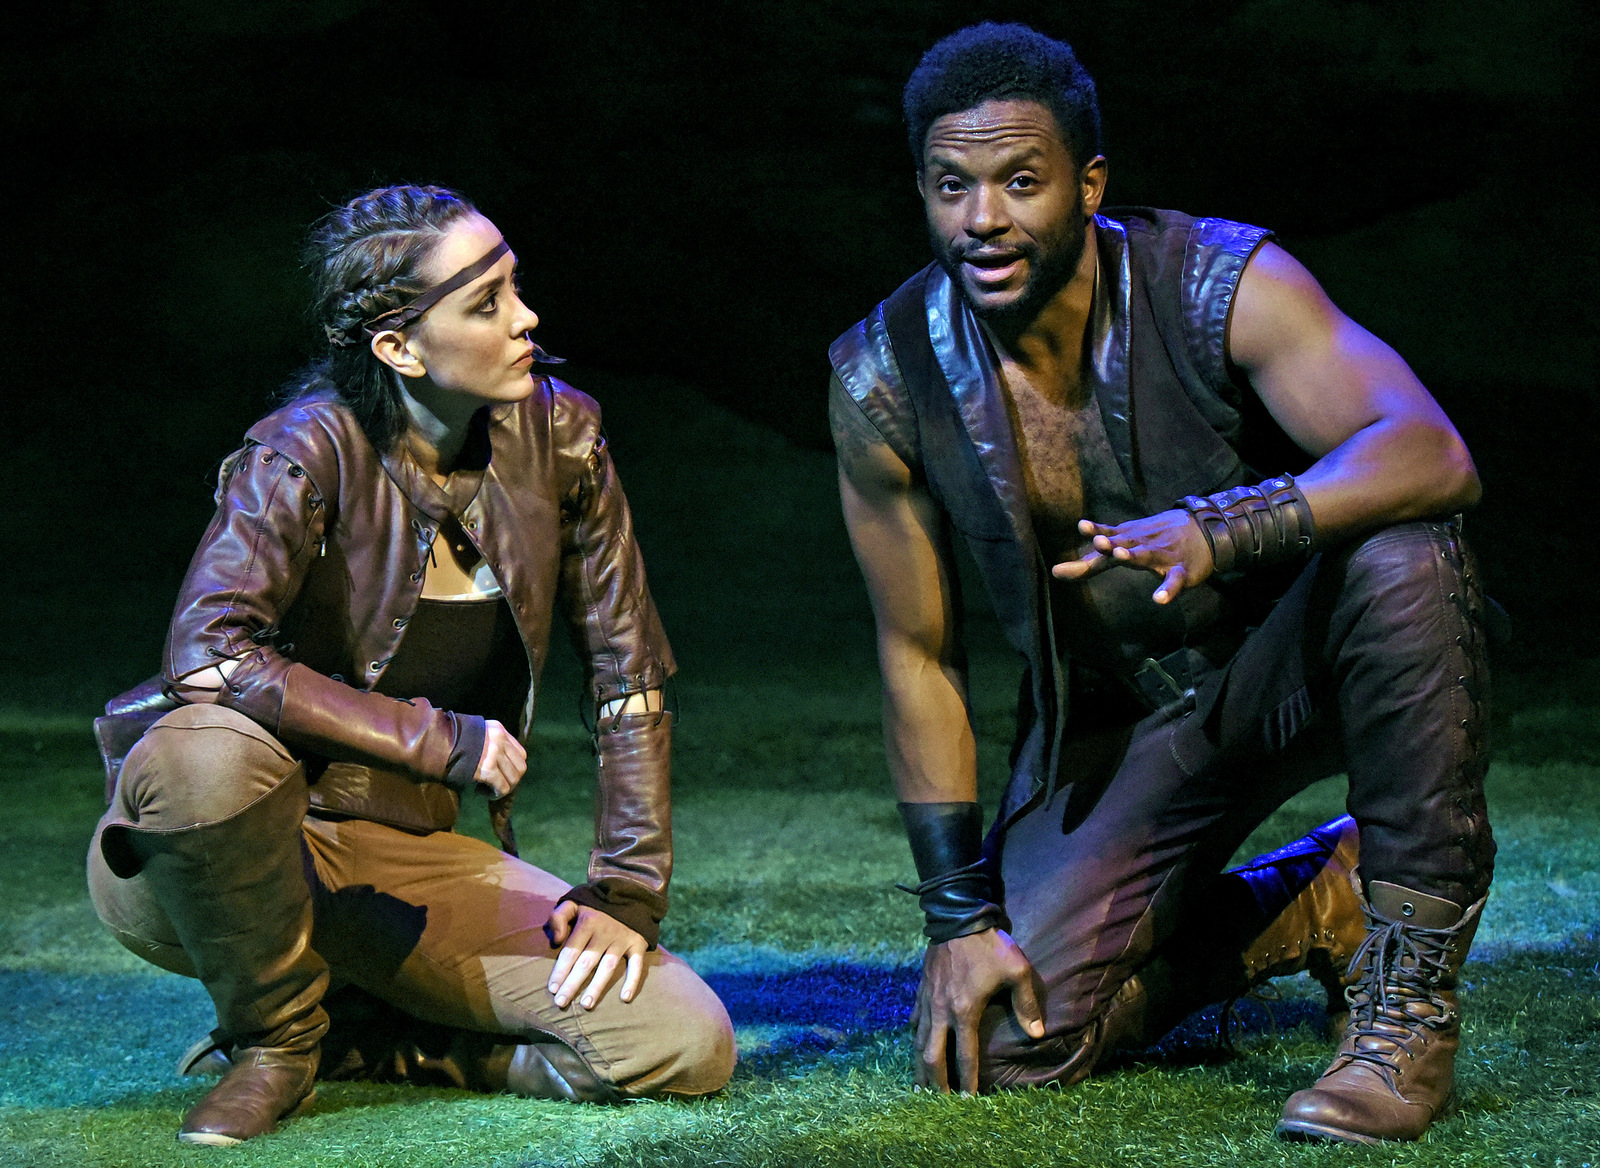 Vesturport and The Wallis’ The Heart of Robin Hood. Pictured (l-r): Christina Bennett Lind and Luke Forbes. Photo credit: Kevin Parry for The Wallis.